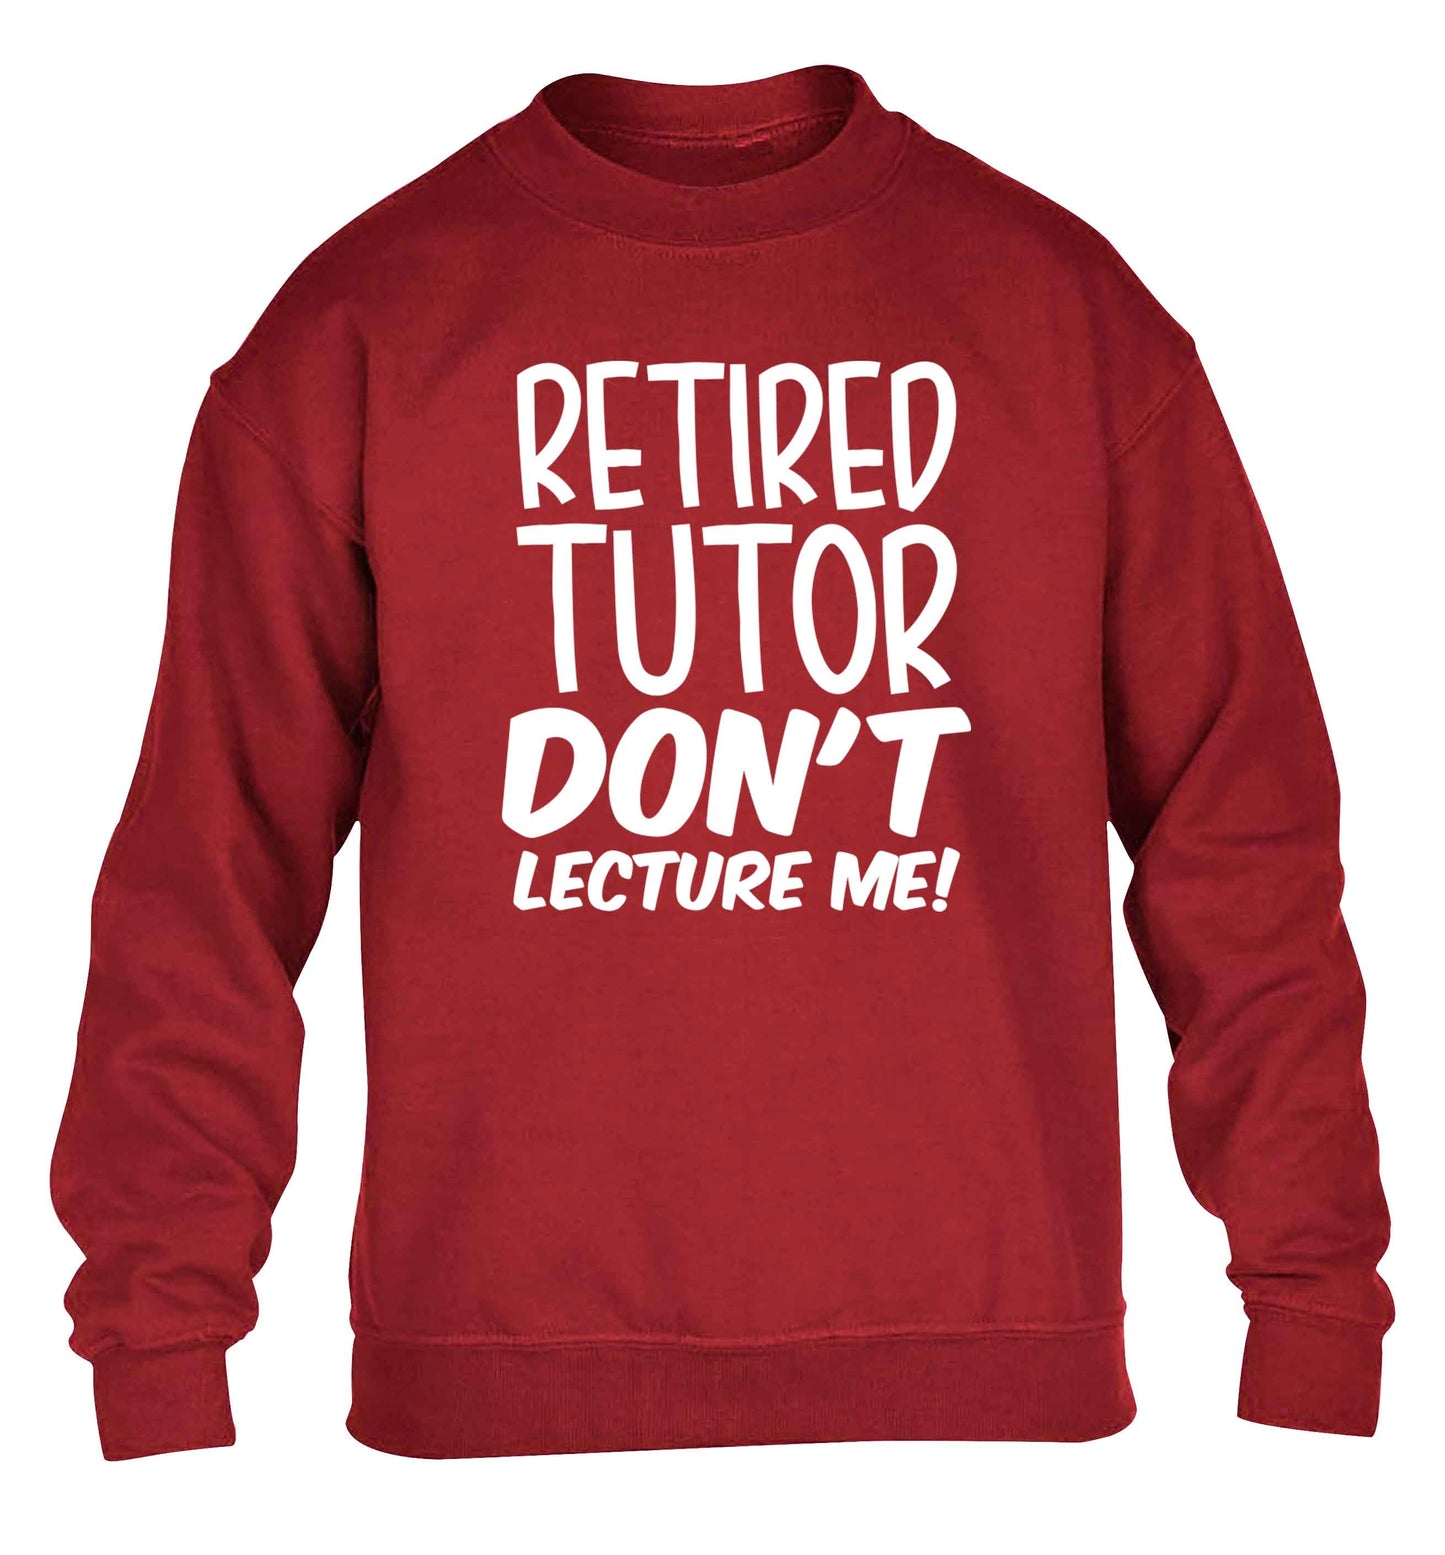 Retired tutor don't lecture me! children's grey sweater 12-13 Years